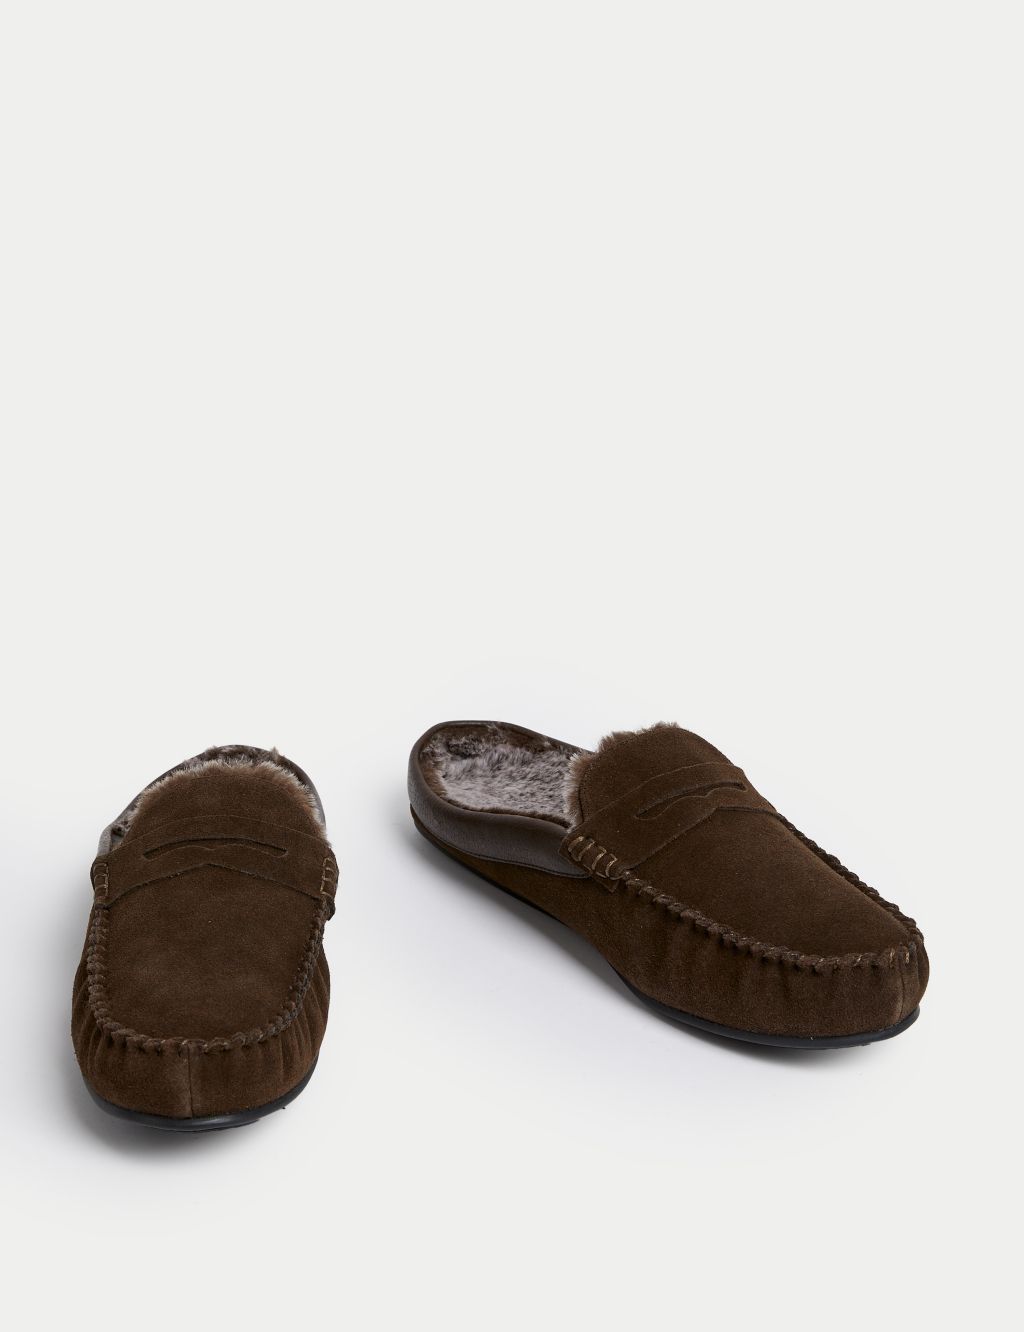 Suede Mule Moccasins 1 of 4